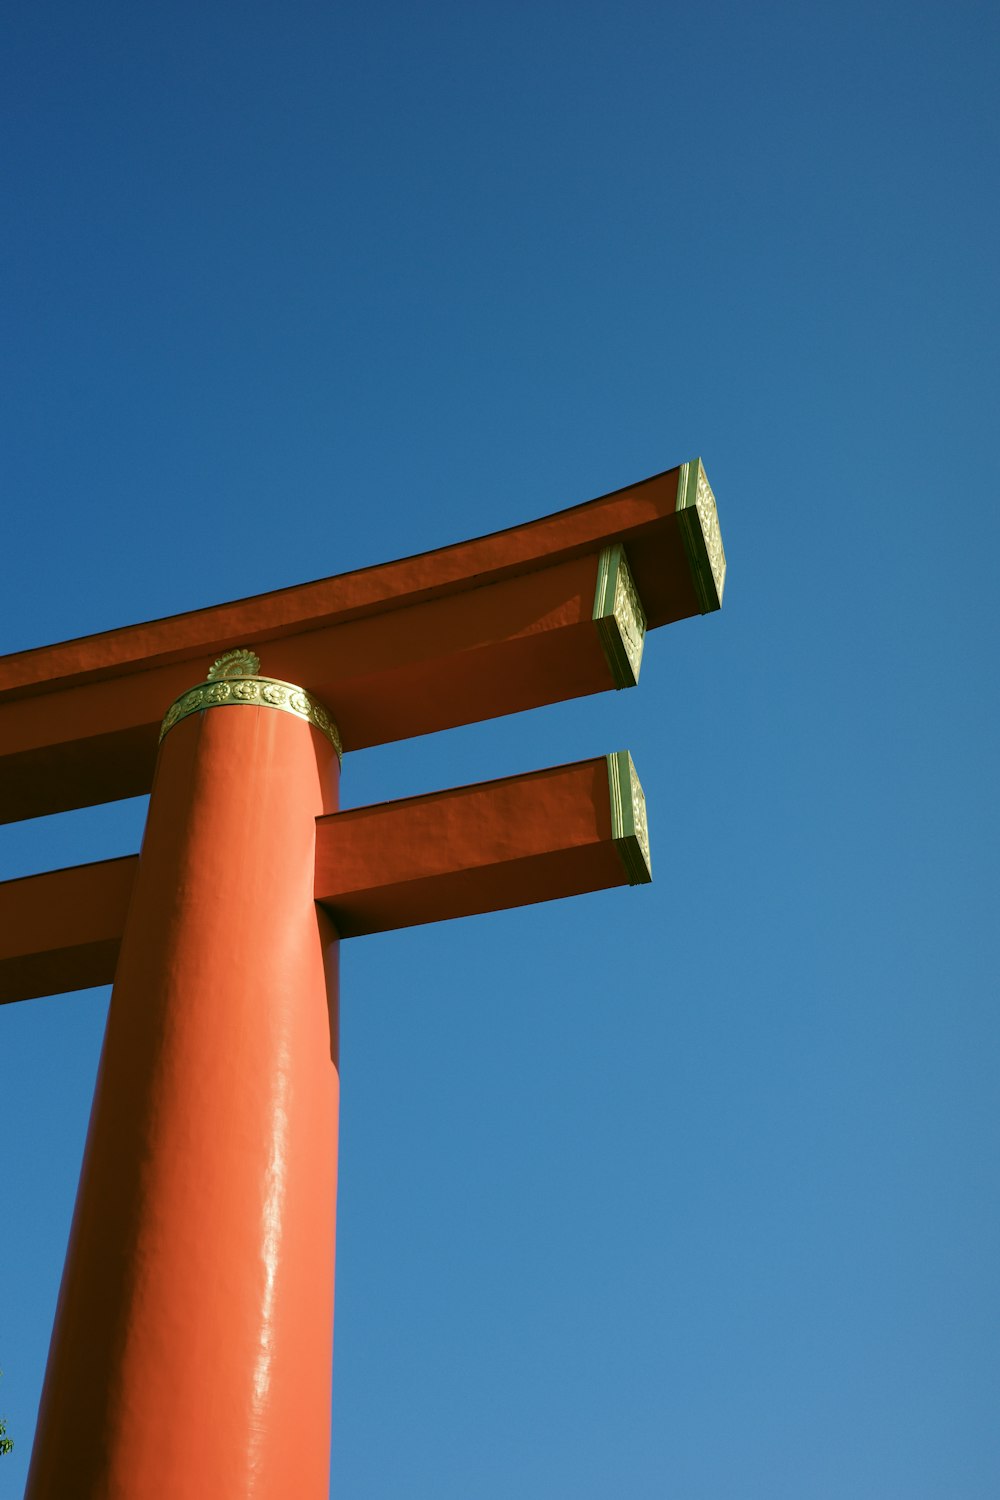 a tall orange structure with a blue sky in the background